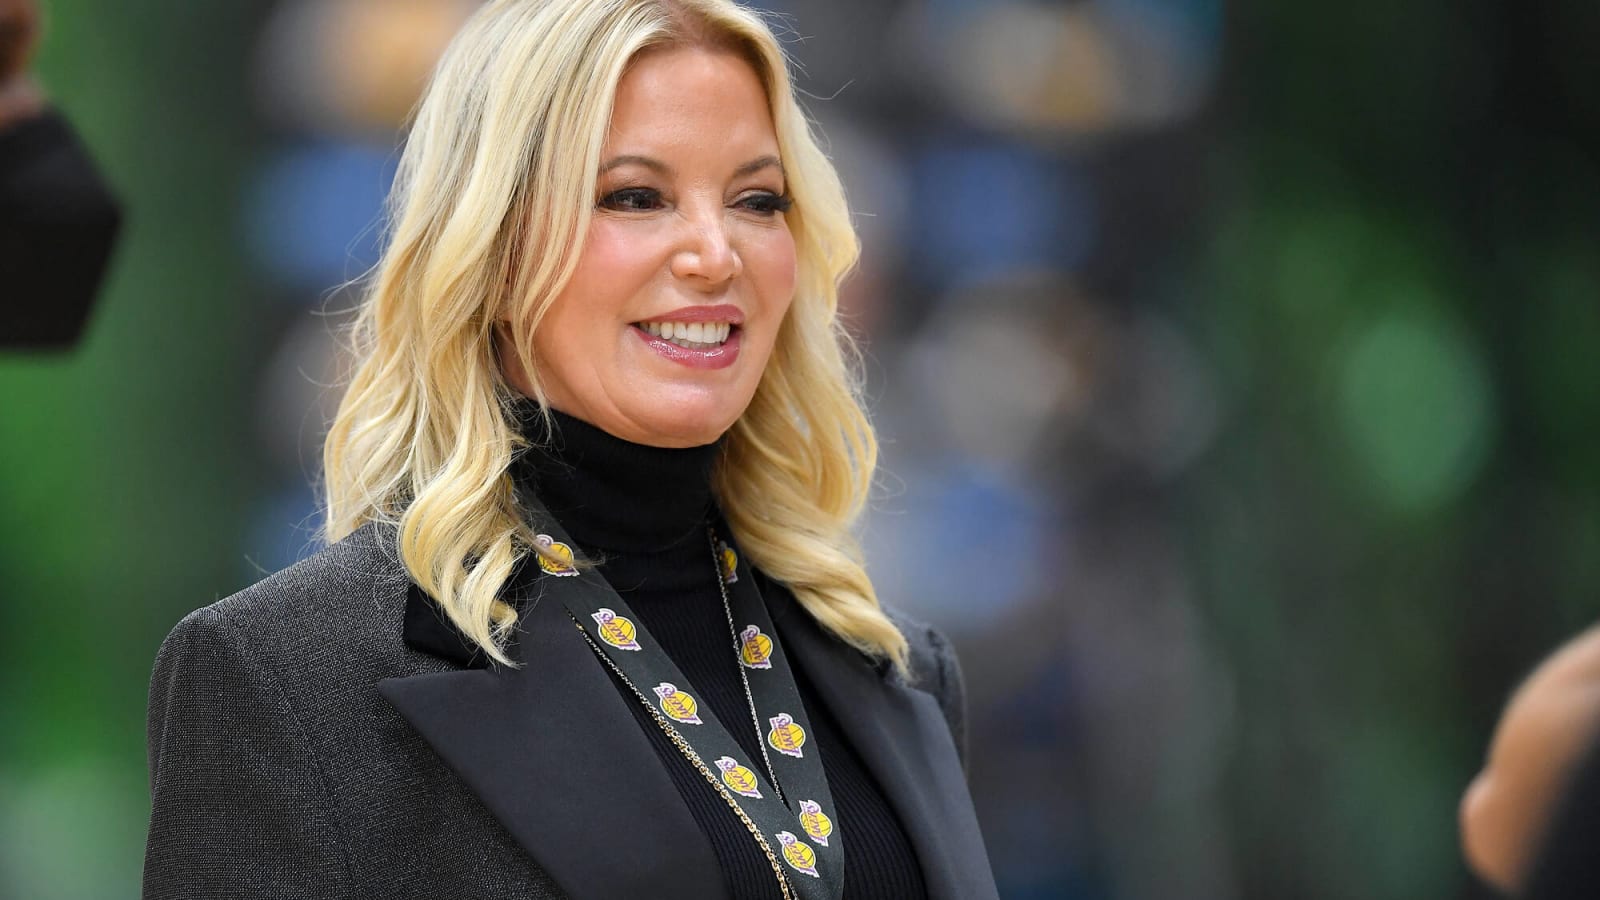 Jeanie Buss On Her Goal Of Having The Most Championships In The NBA: "We Are Now Tied With The Celtics, And I Gotta Get Number 18 Before They Do..."